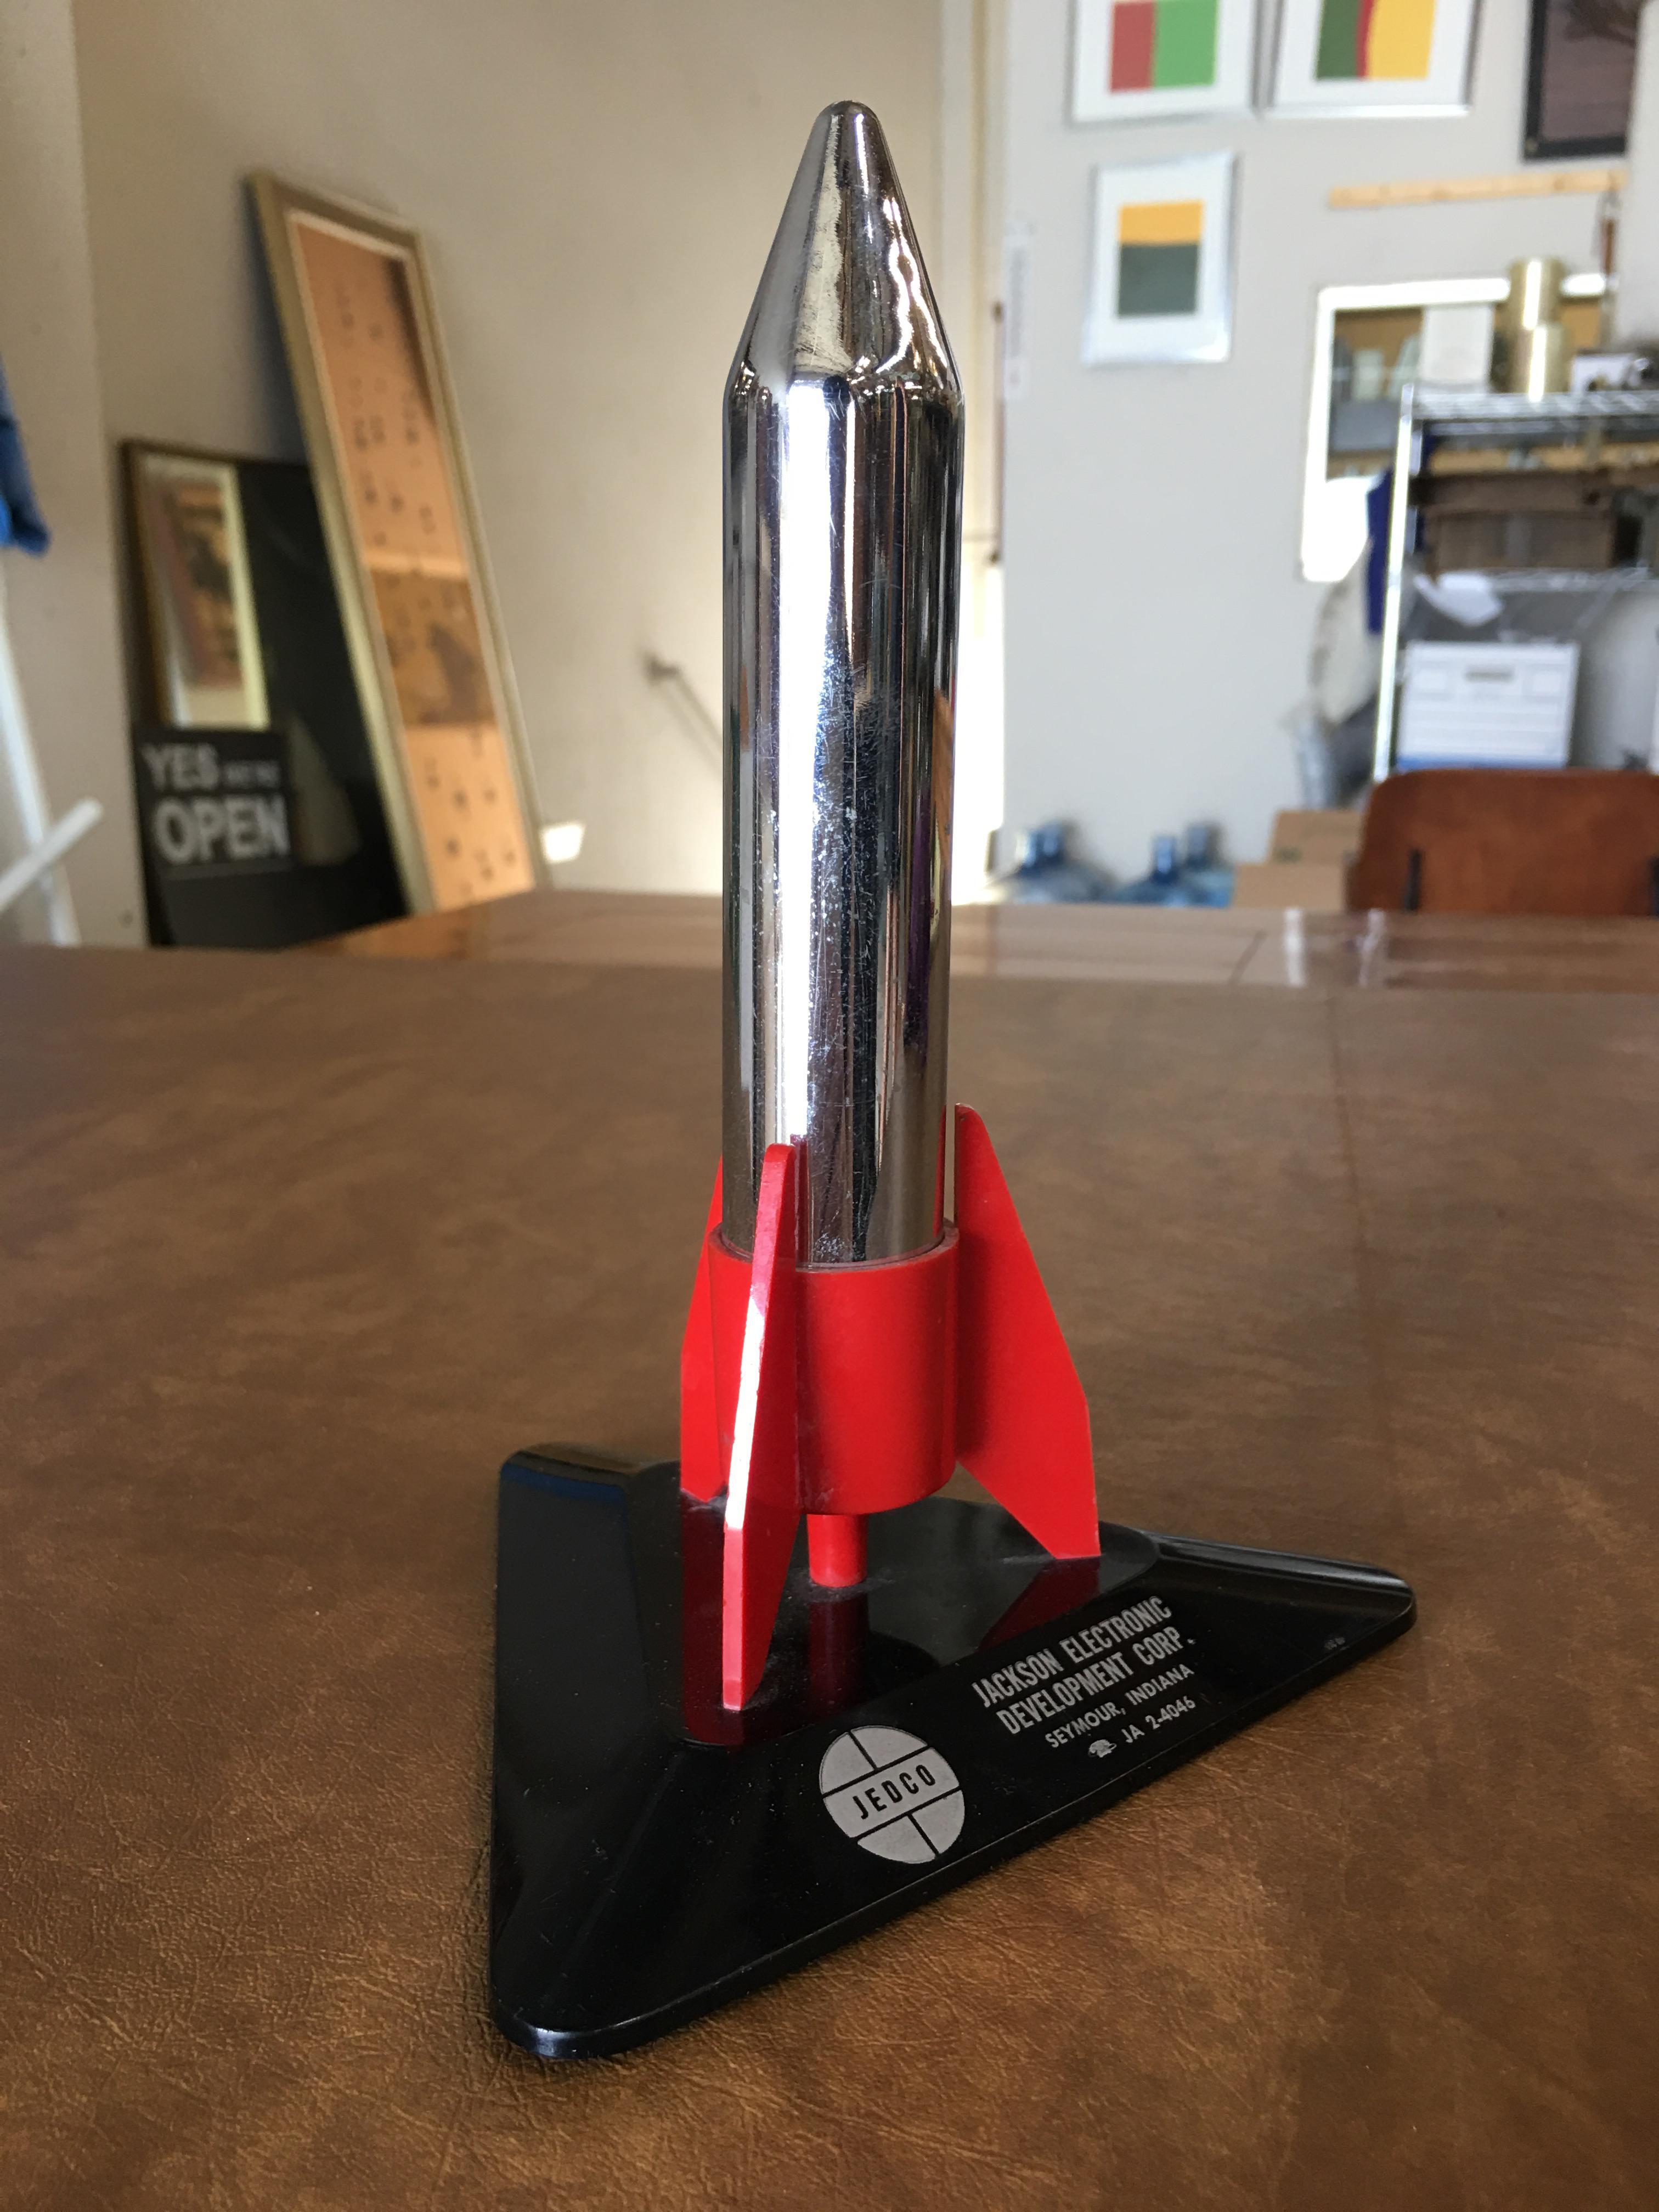 Vintage 1960 chrome Jedco rocket shaped tabletop lighter featuring a chrome rocket ship resting in a black and red plastic base. The front text reads 